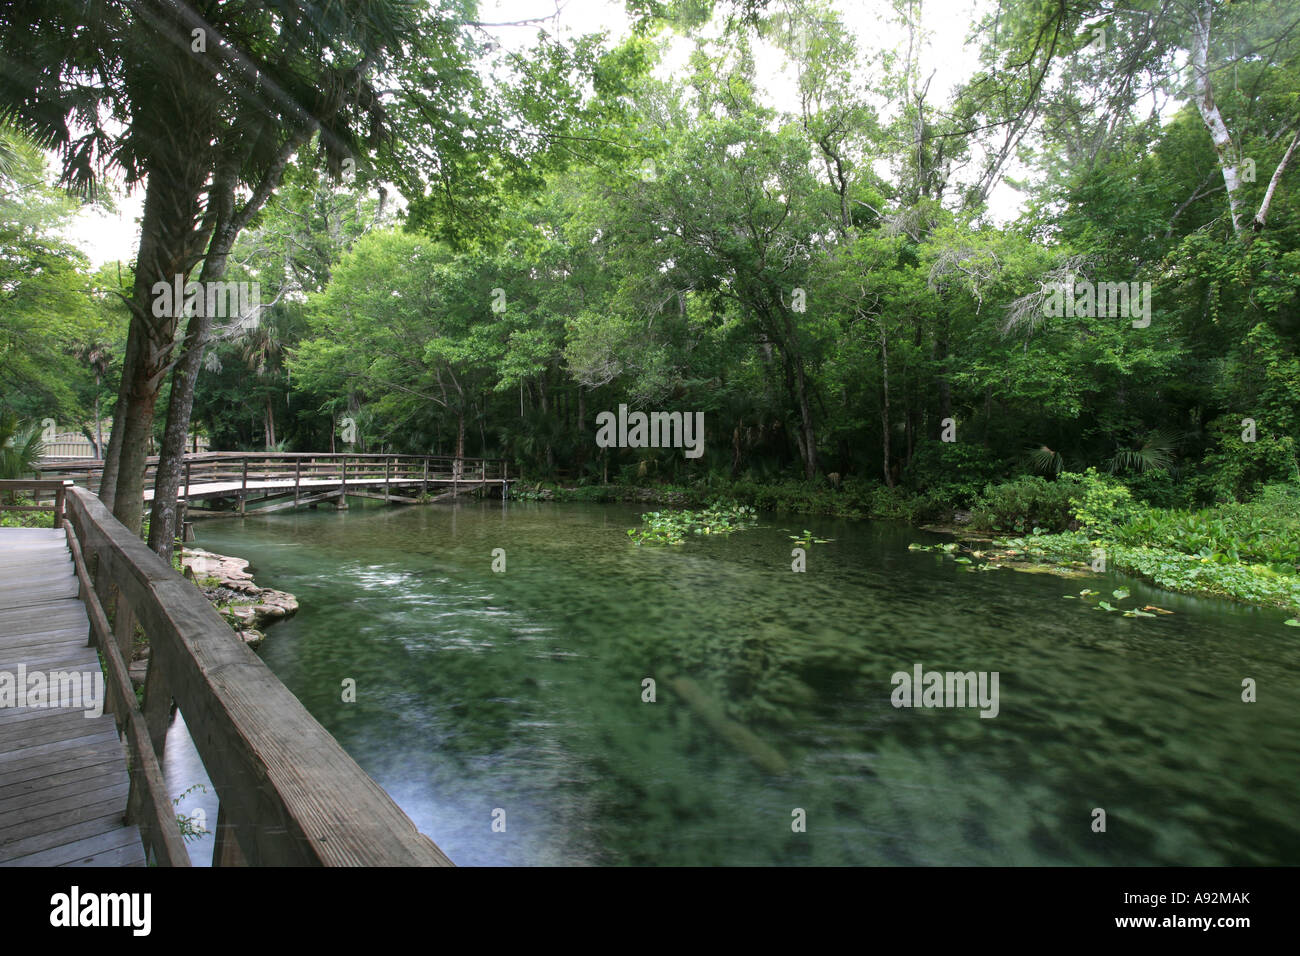 Canoes in the clear water of Wekiwa Springs, Florida, USA Stock Photo